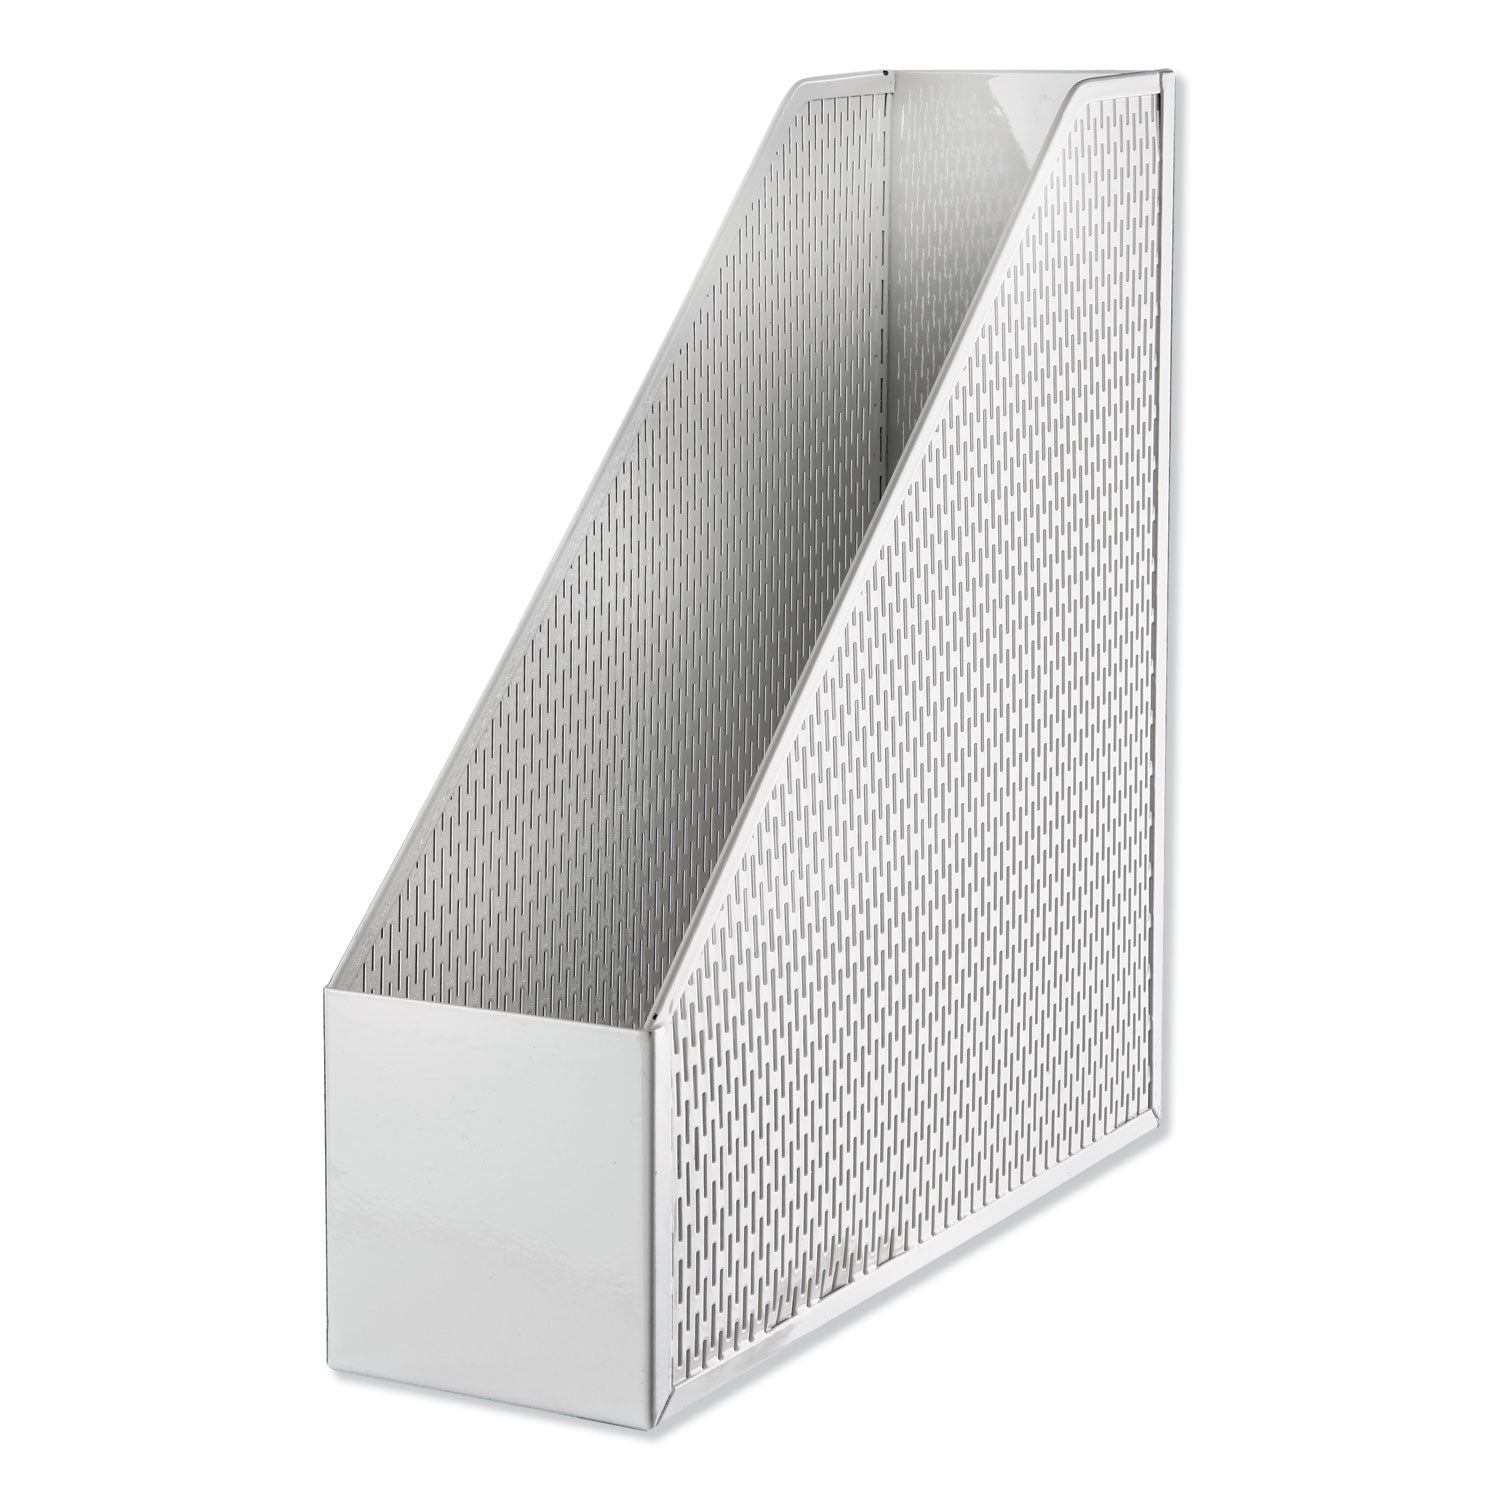 urban-collection-punched-metal-magazine-file-35-x-10-x-115-white_aopart20004wh - 2